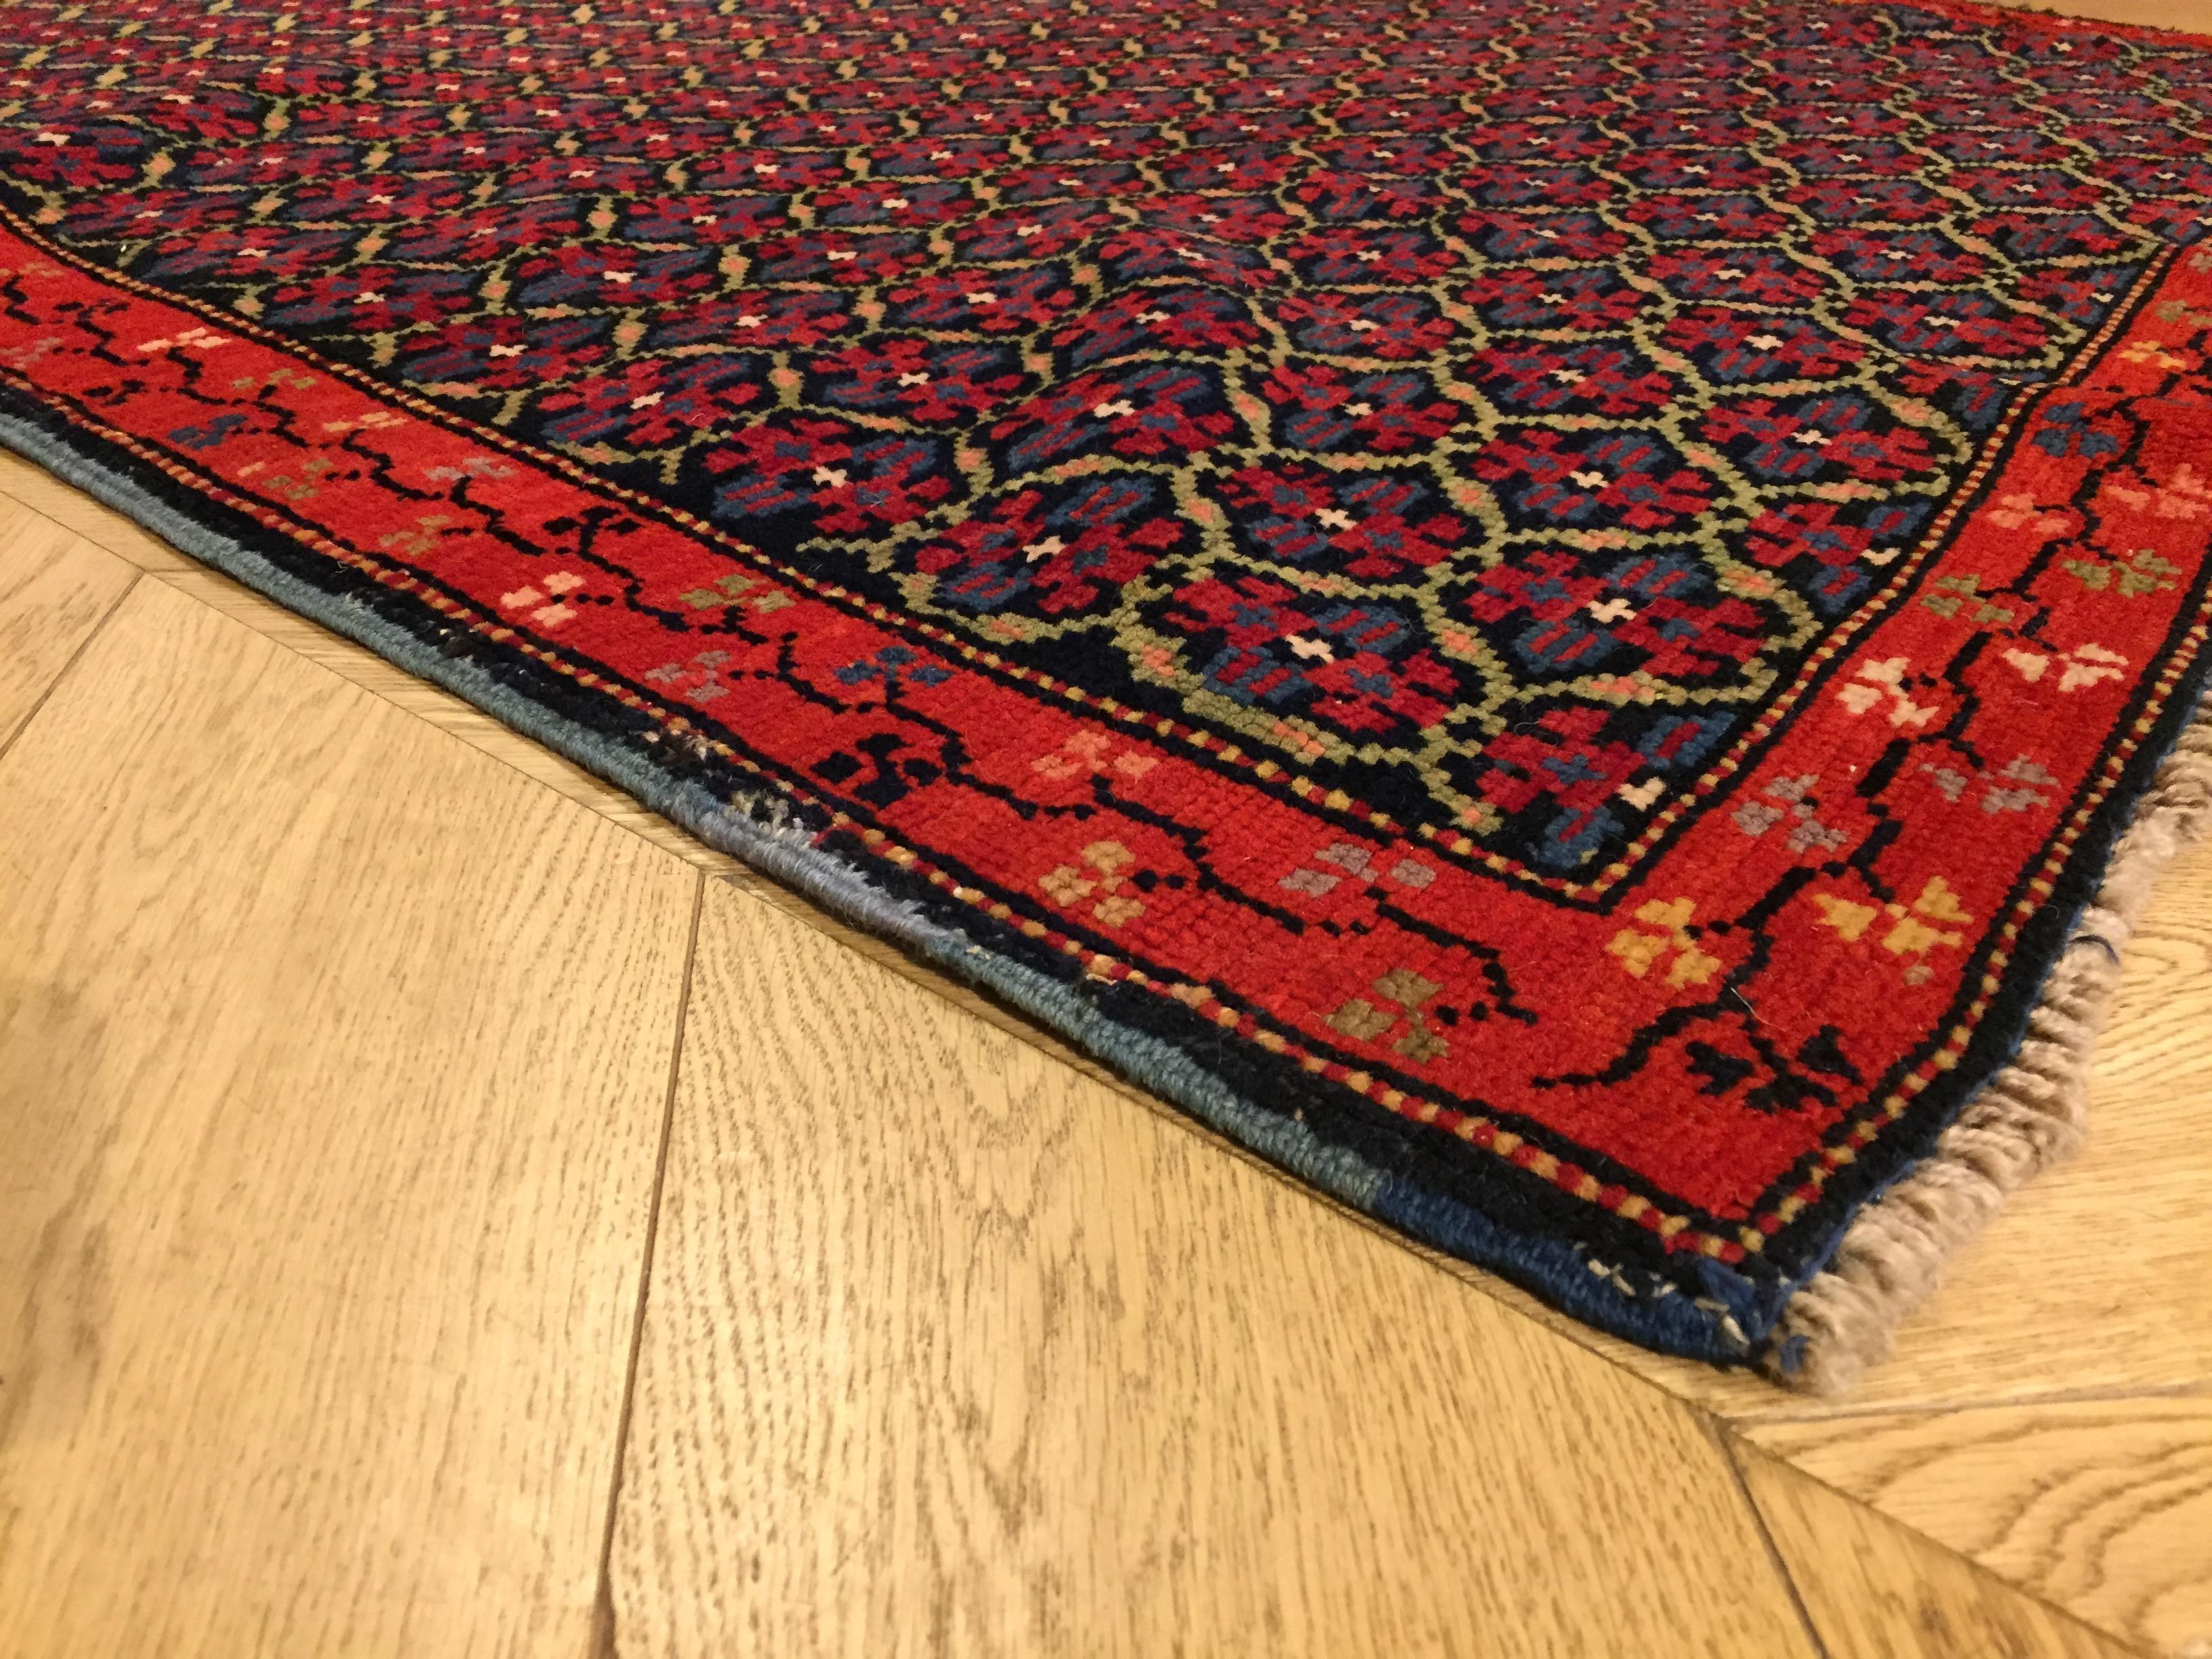 19th Century Red and Blue Flower Wool Runner Karabagh Caucasian Rug, circa 1950 For Sale 3